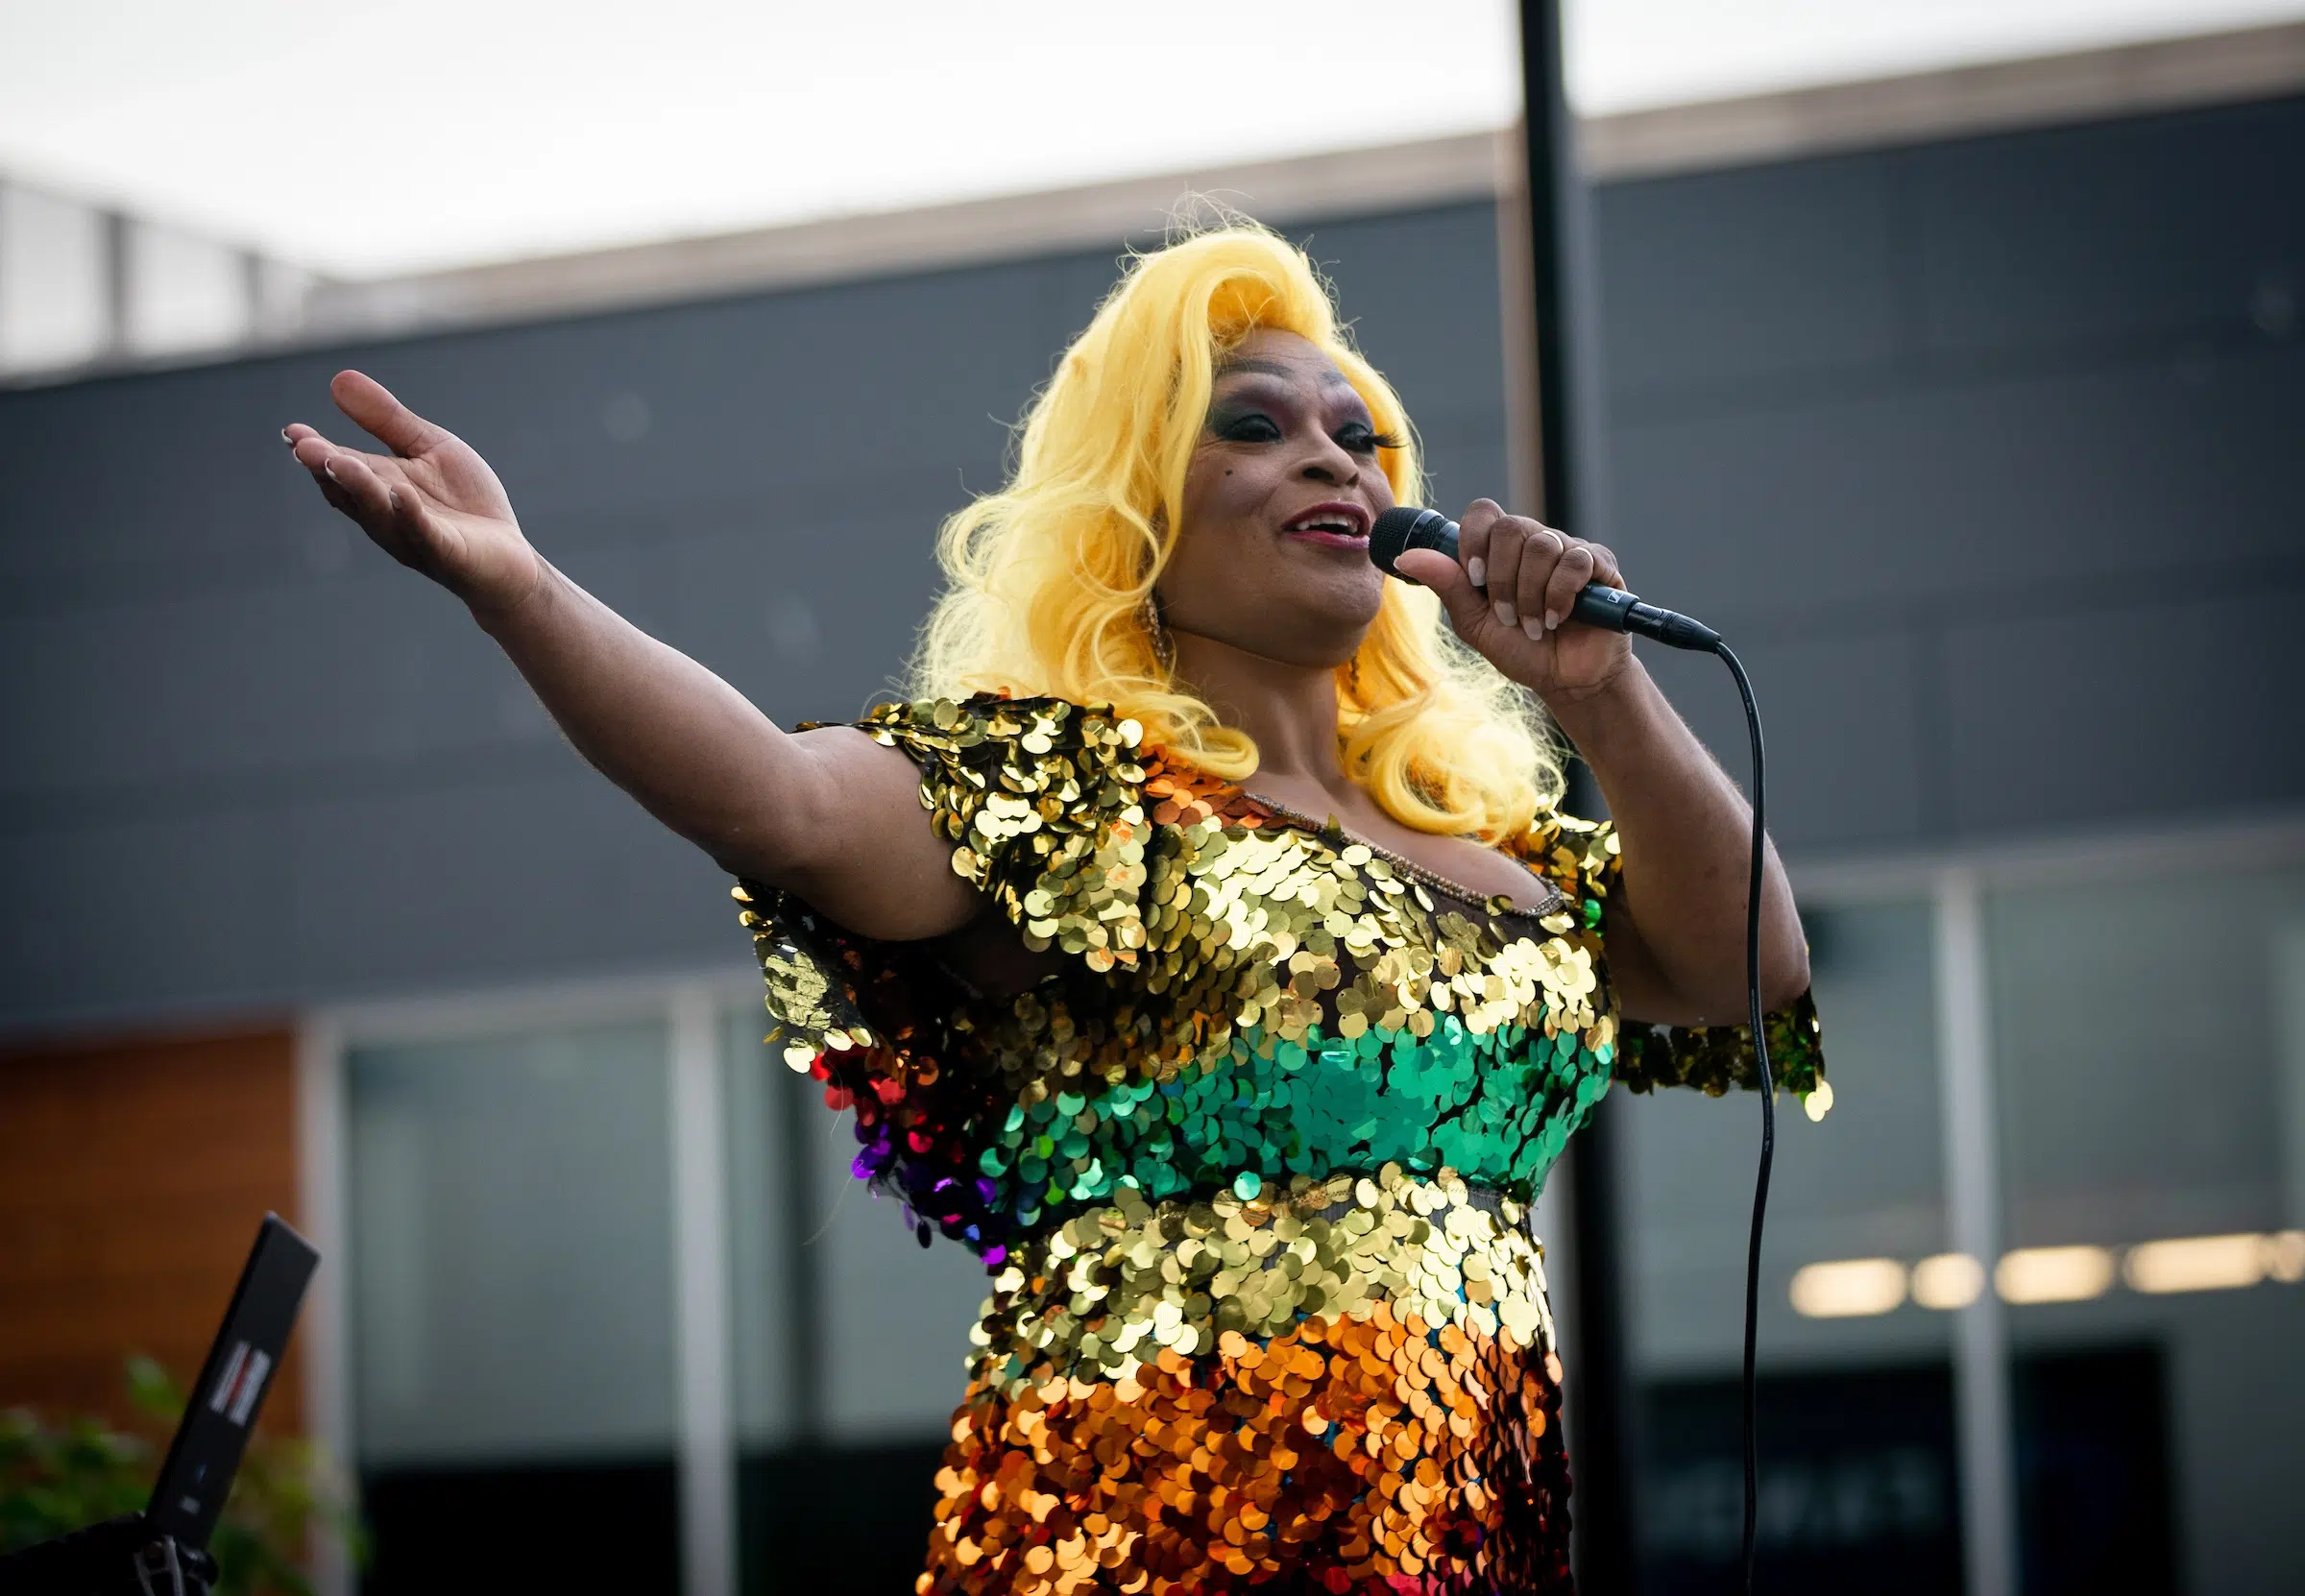 A drag queen in a rainbow sequin dress and a blonde wig speaks into a microphone.